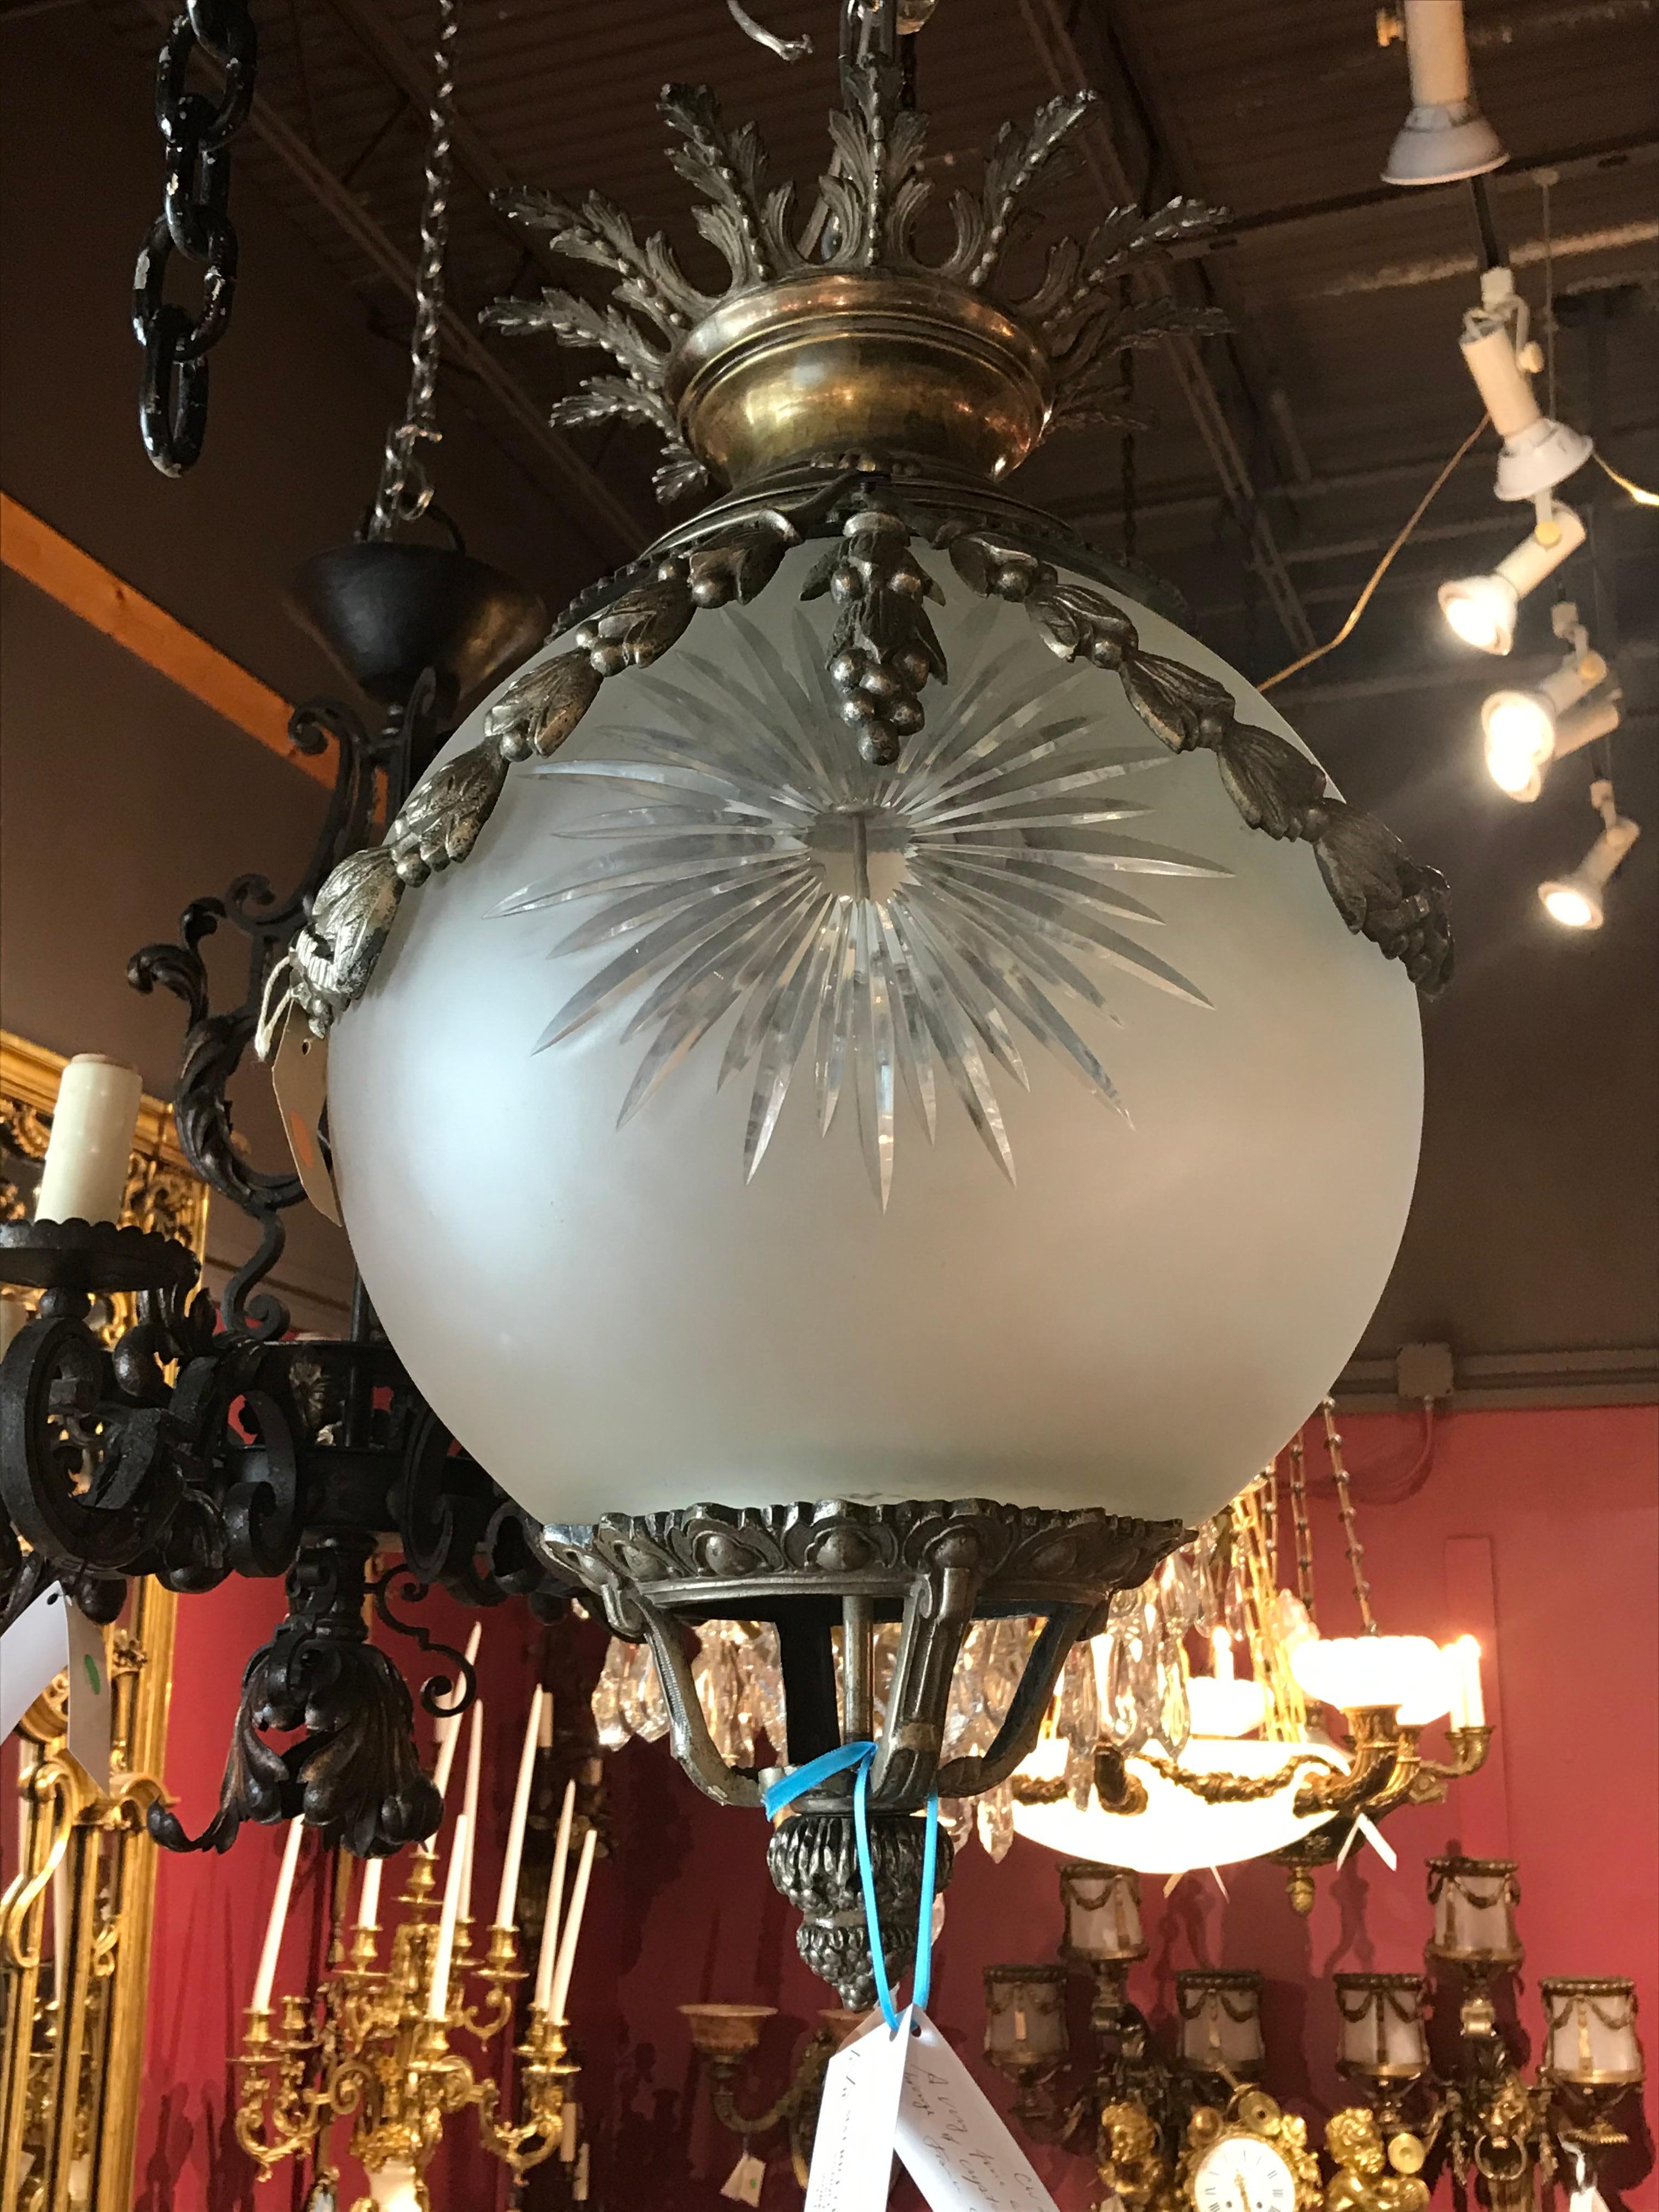 A very fine bronze lantern with frosted and cut crystal globe,
France, circa 1930. 2 lights
Dimensions: Height 24